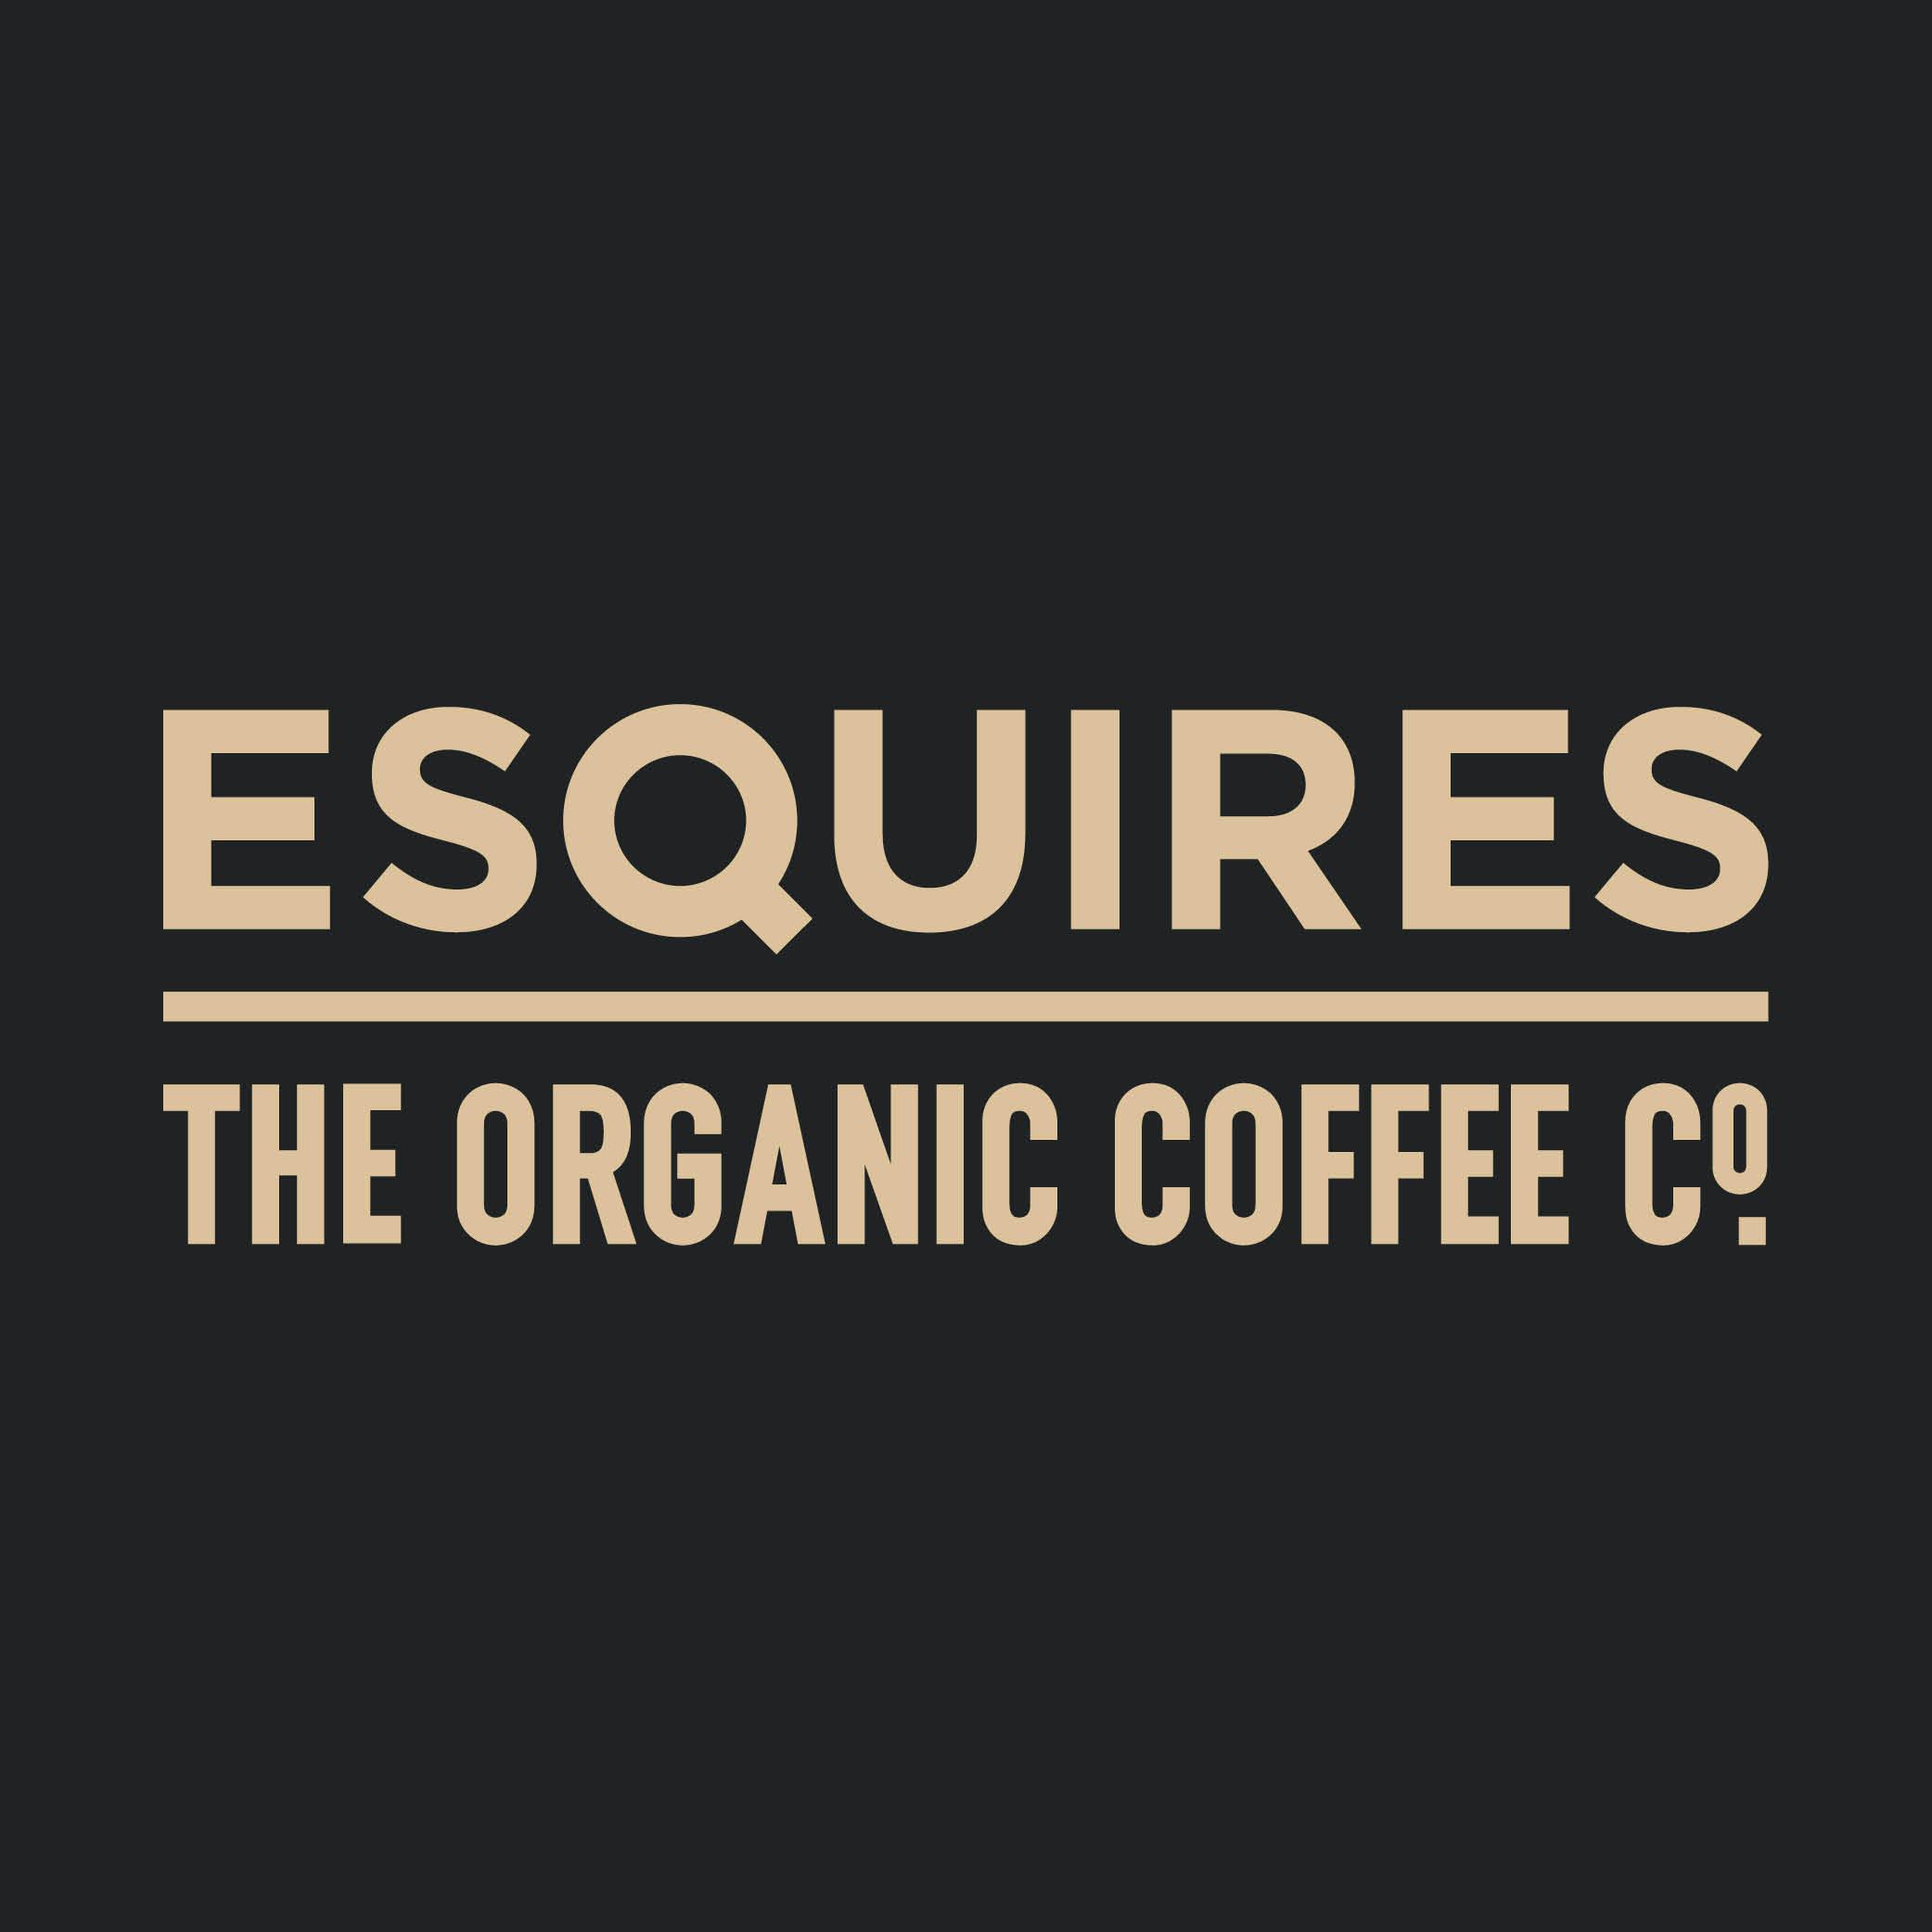 Esquires Coffee Corby - Corby, Northamptonshire NN17 1NQ - 01280 852021 | ShowMeLocal.com